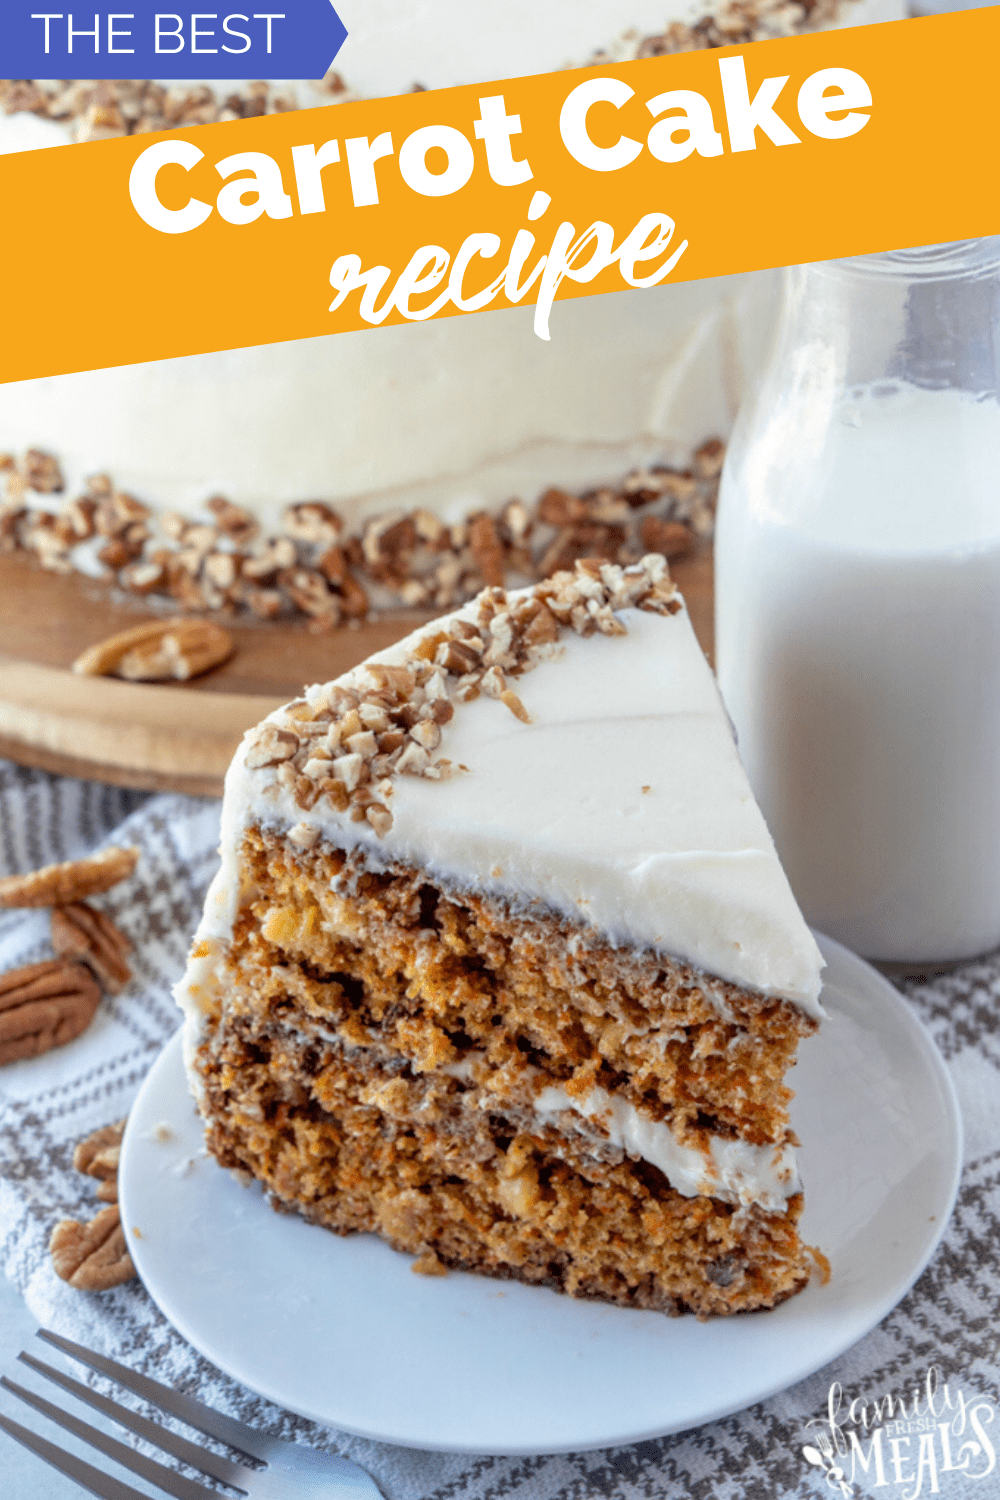 There are lots of different recipes for carrot cake out there. But I feel confident in calling this one The Best Carrot Cake Recipe. #carrotcake #easter #creamcheese #homemade #cake #familyfreshmeals via @familyfresh